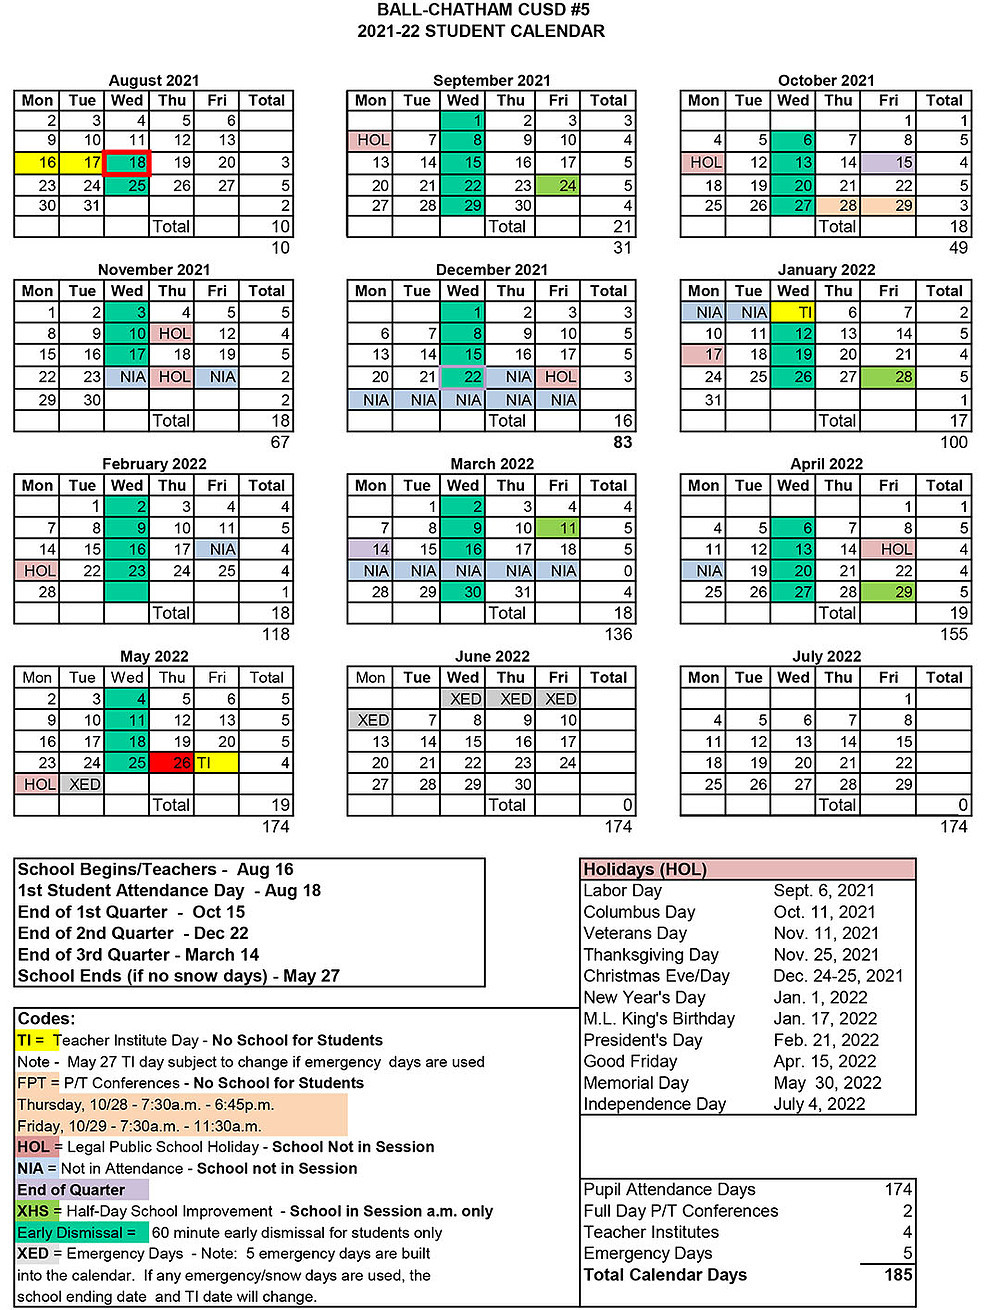 Board Of Education Approves Student Attendance Calendars-Absentee Calendars 2021